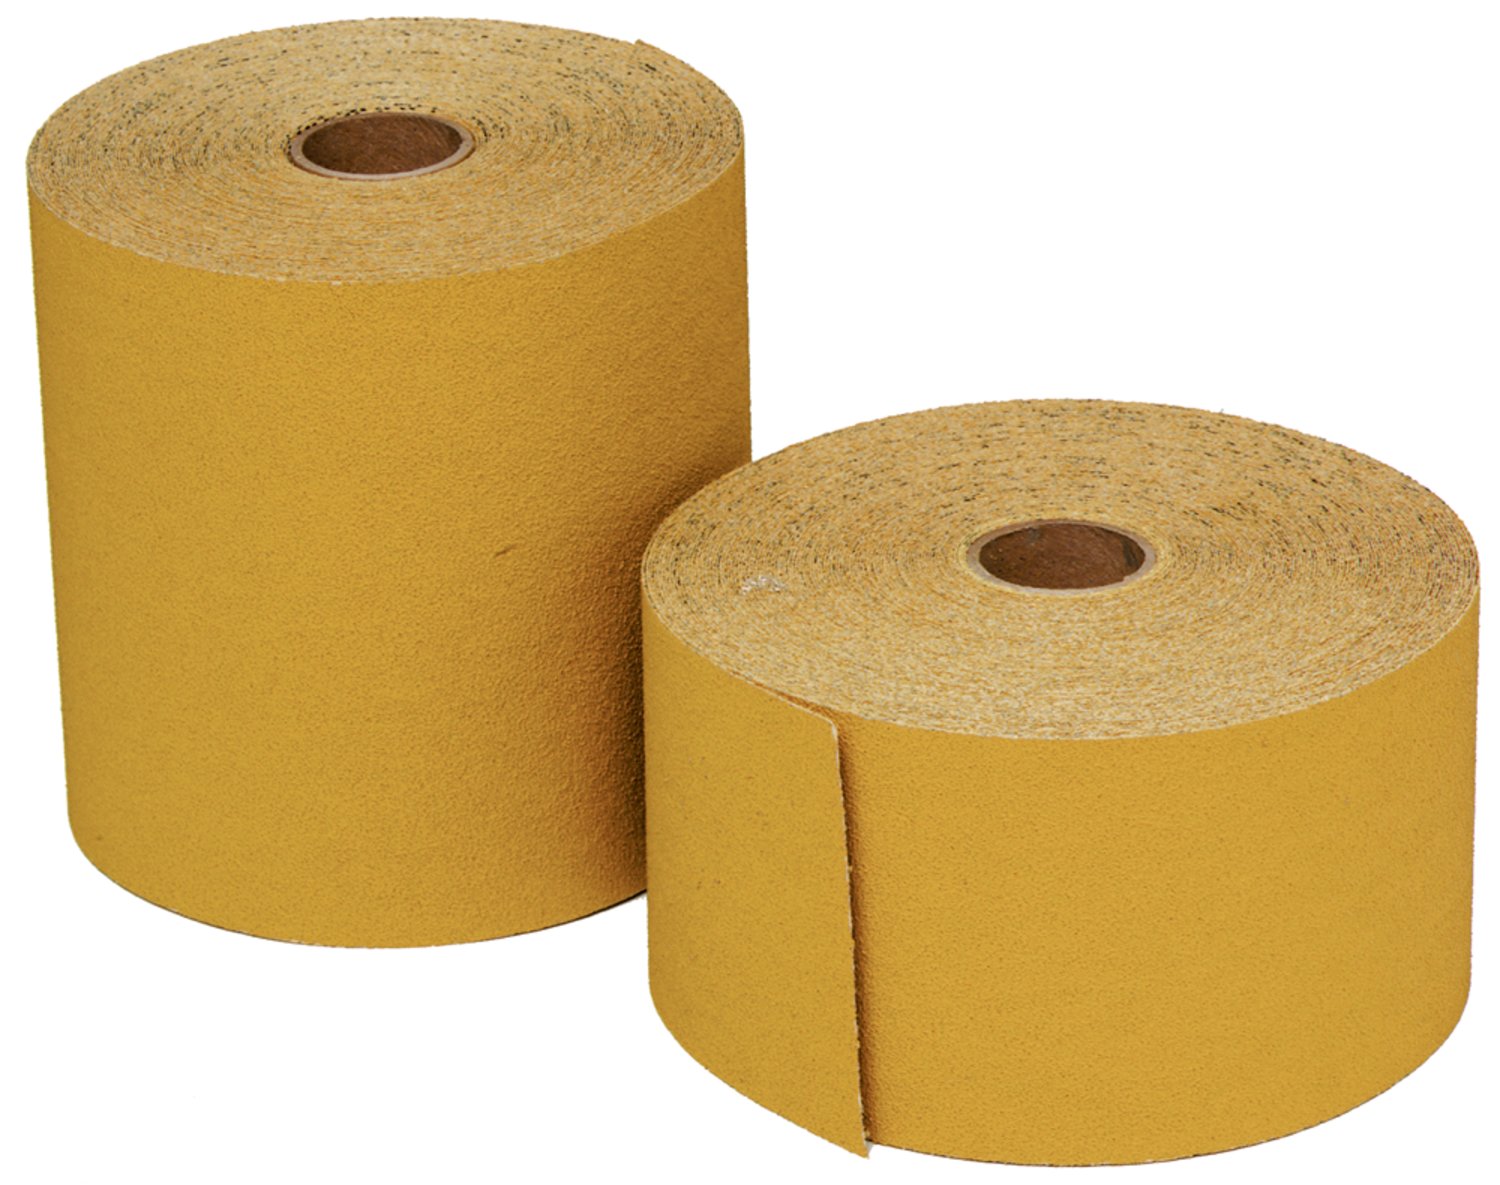 7100093553 - 3M Stikit Gold Paper Roll 216U, P600 A-weight, Linered, Config